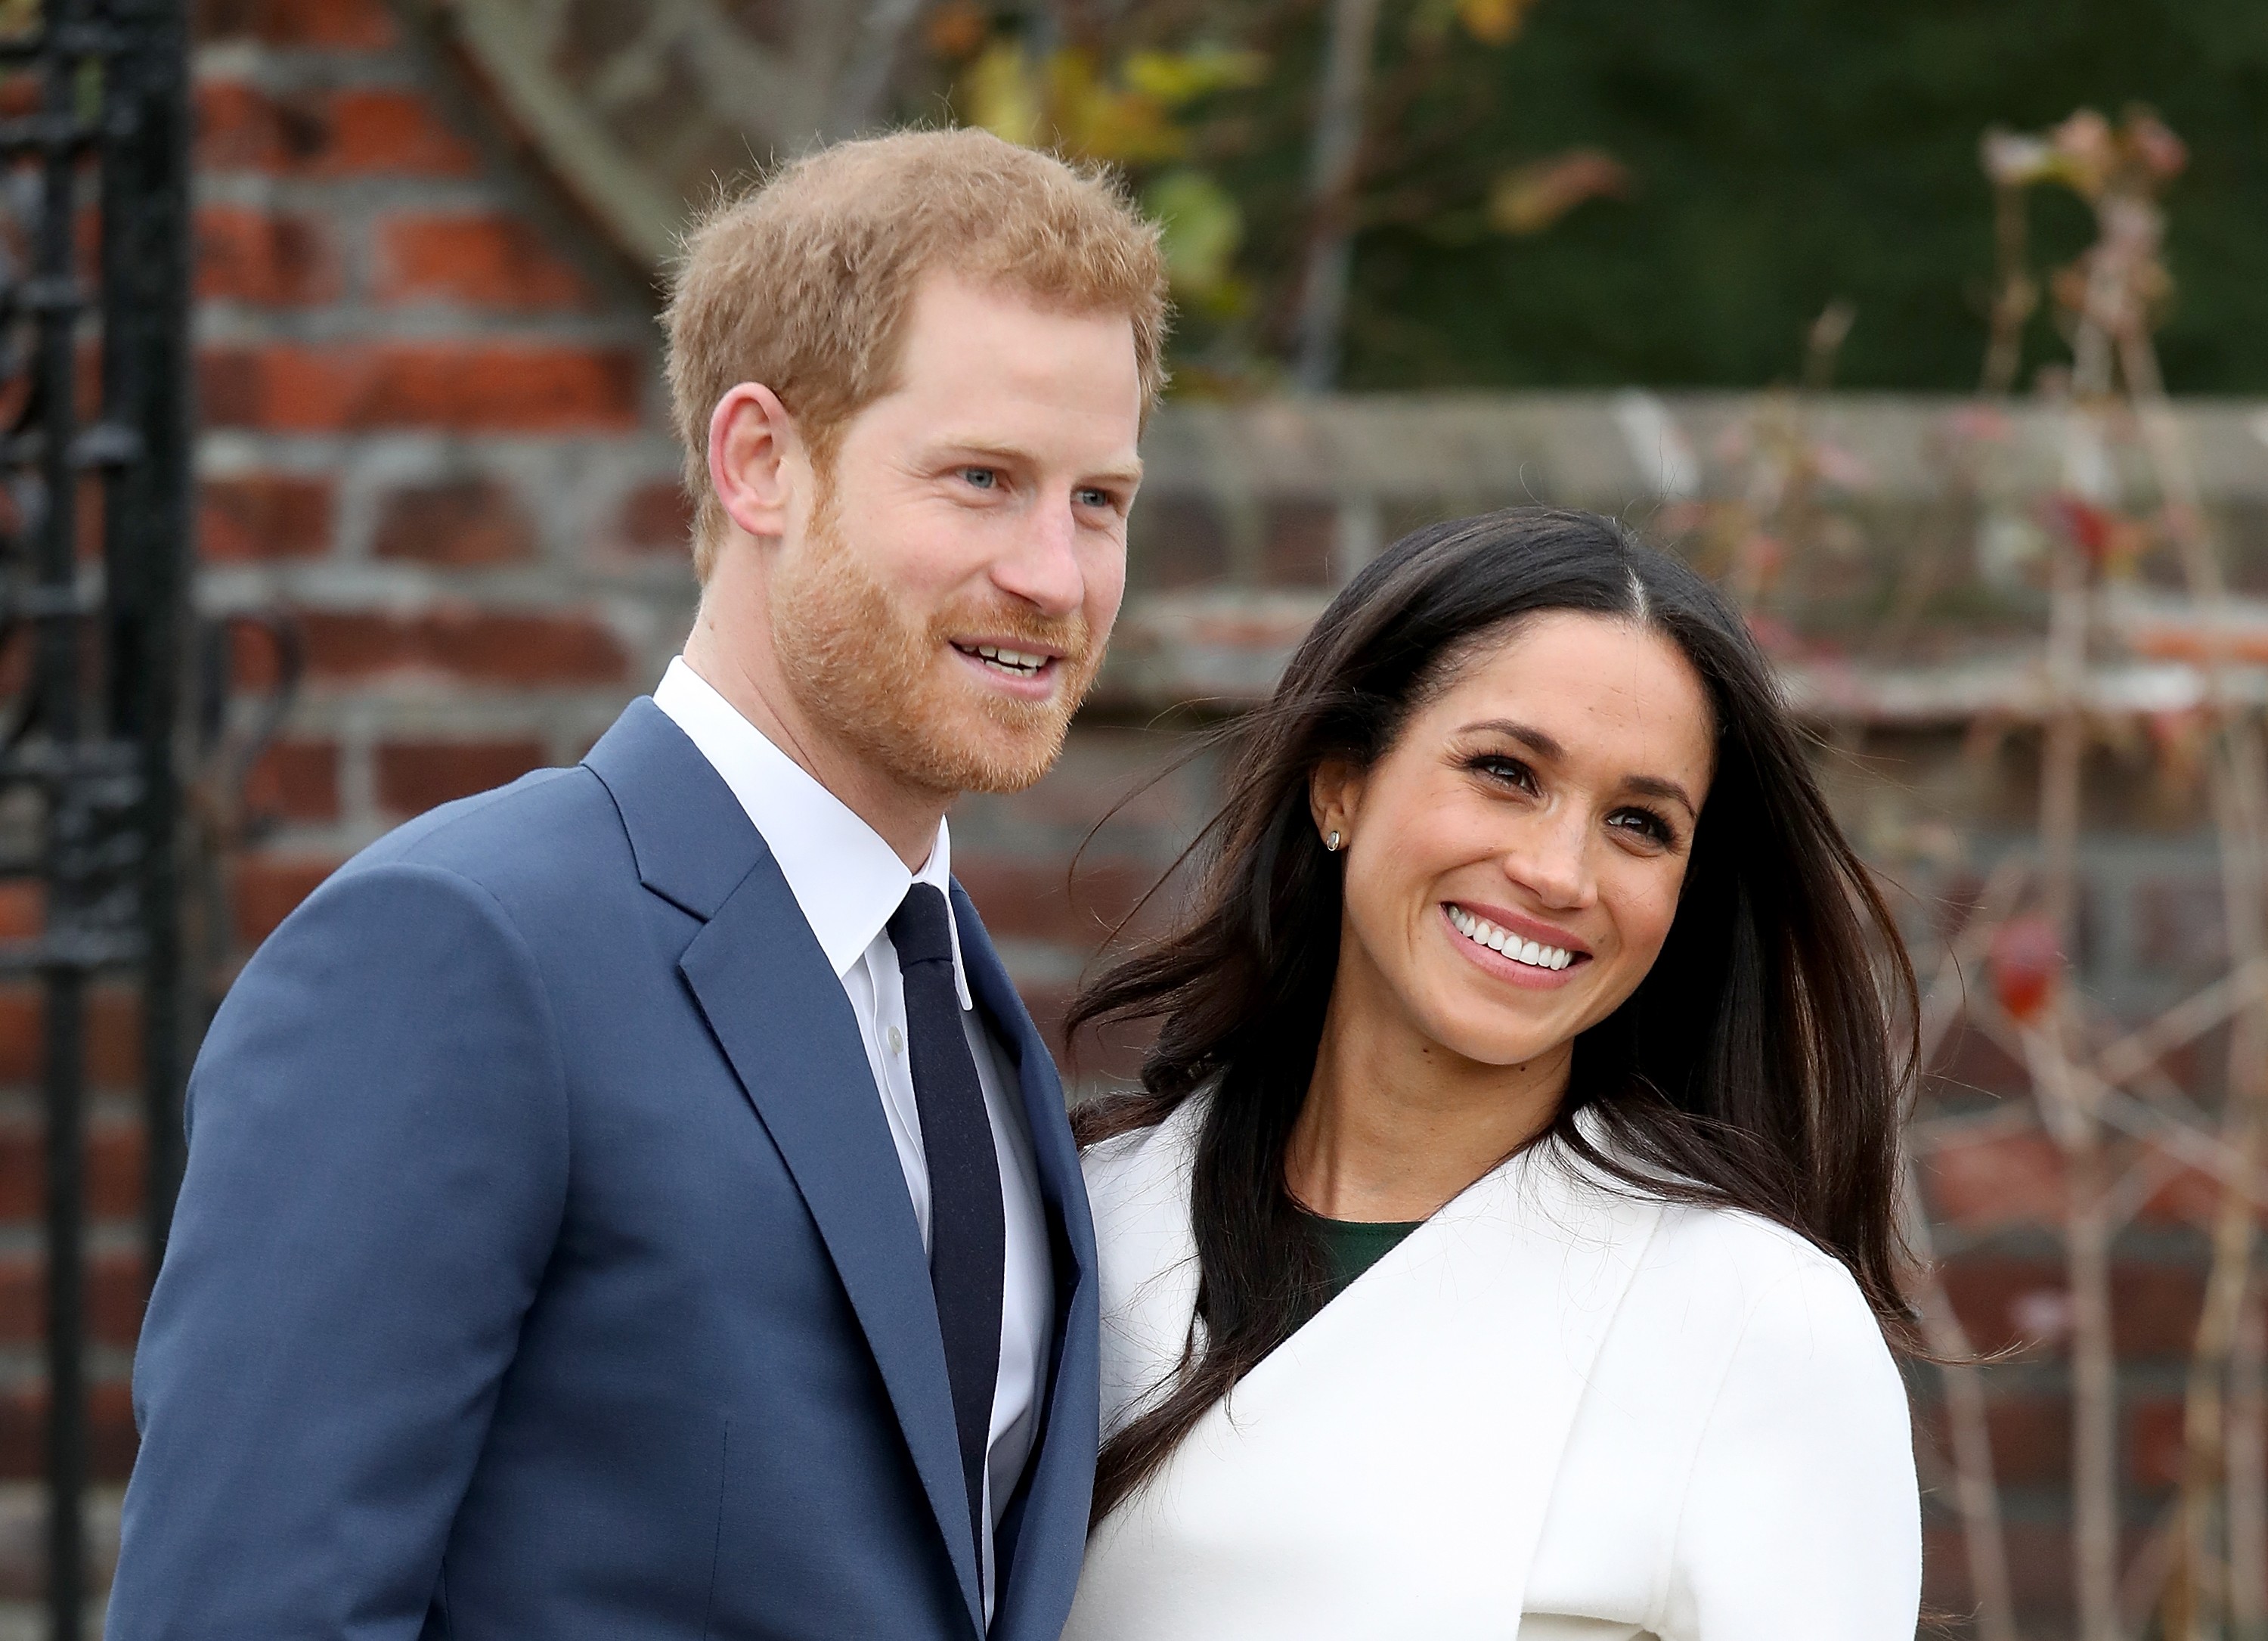 LONDON, ENGLAND - NOVEMBER 27:  Prince Harry and actress Meghan Markle during an official photocall to announce their engagement at The Sunken Gardens at Kensington Palace on November 27, 2017 in London, England.  Prince Harry and Meghan Markle have been  (Foto: Chris Jackson/Getty Images)